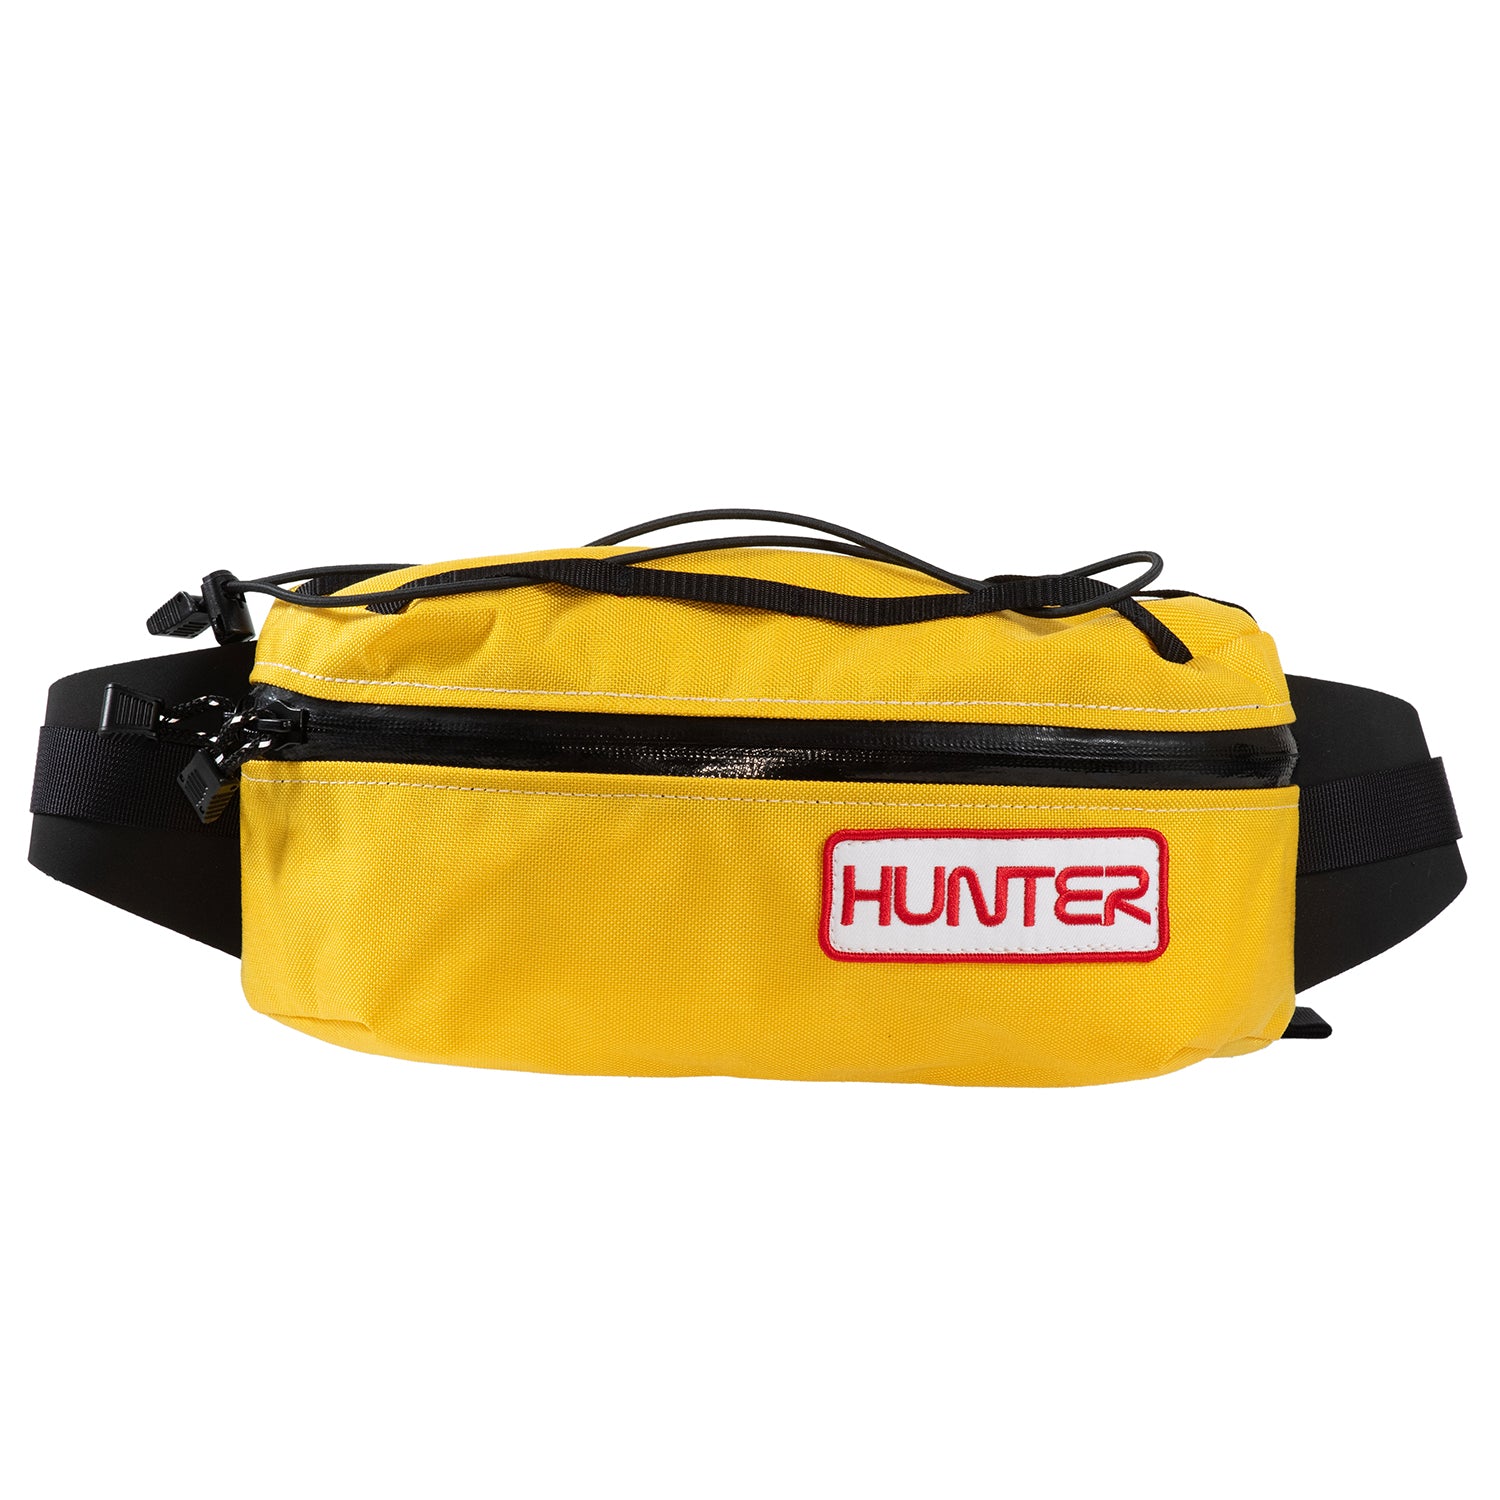 HUNTER CYCLES Shred Packs With Bungee Top